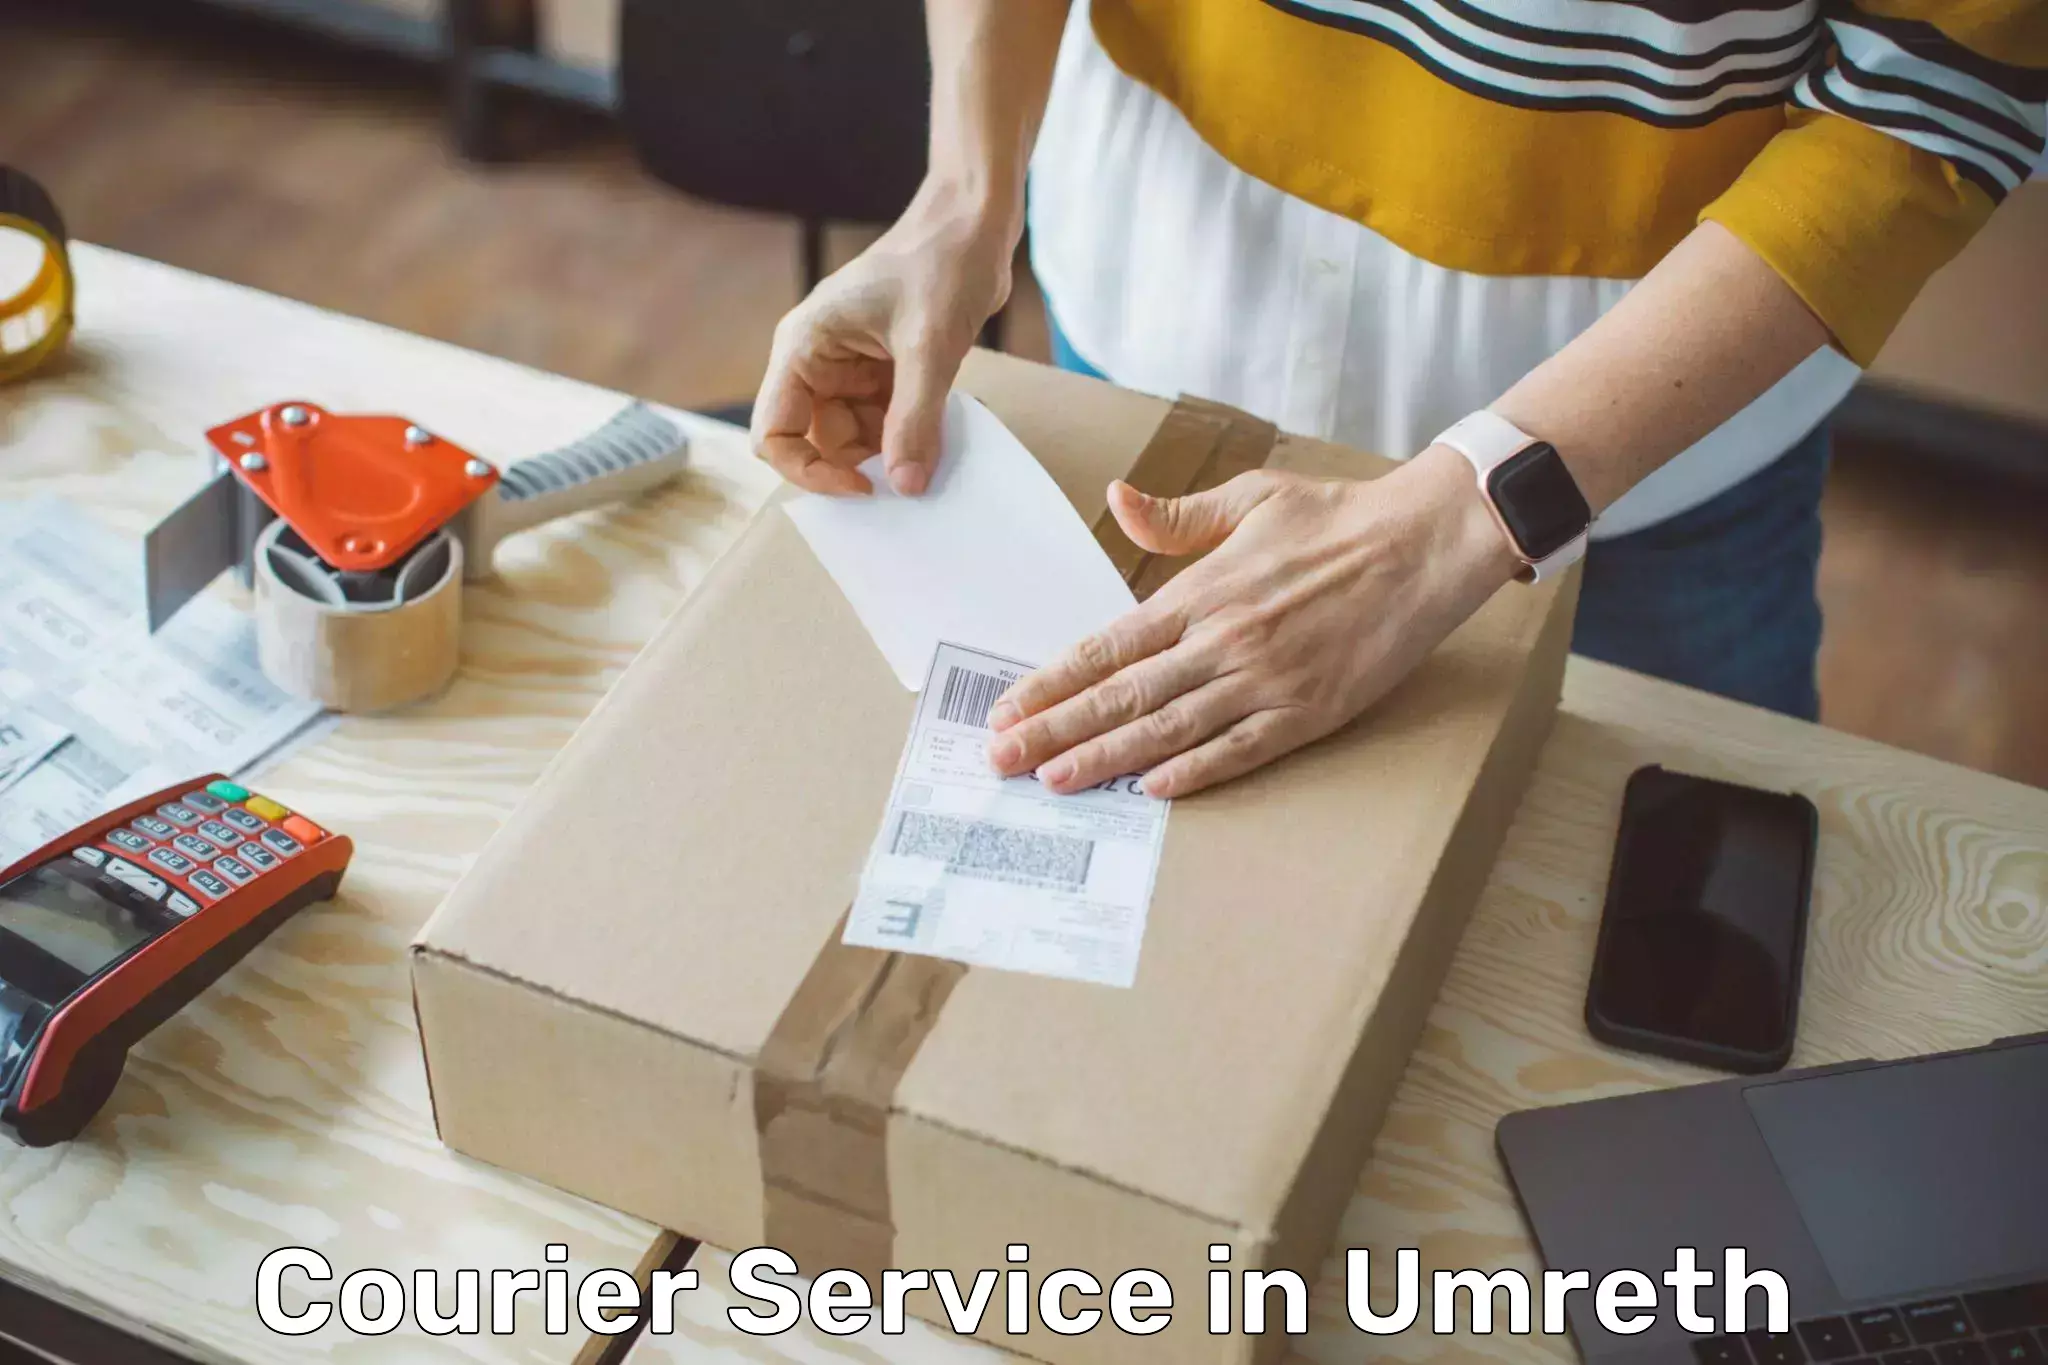 On-demand shipping options in Umreth